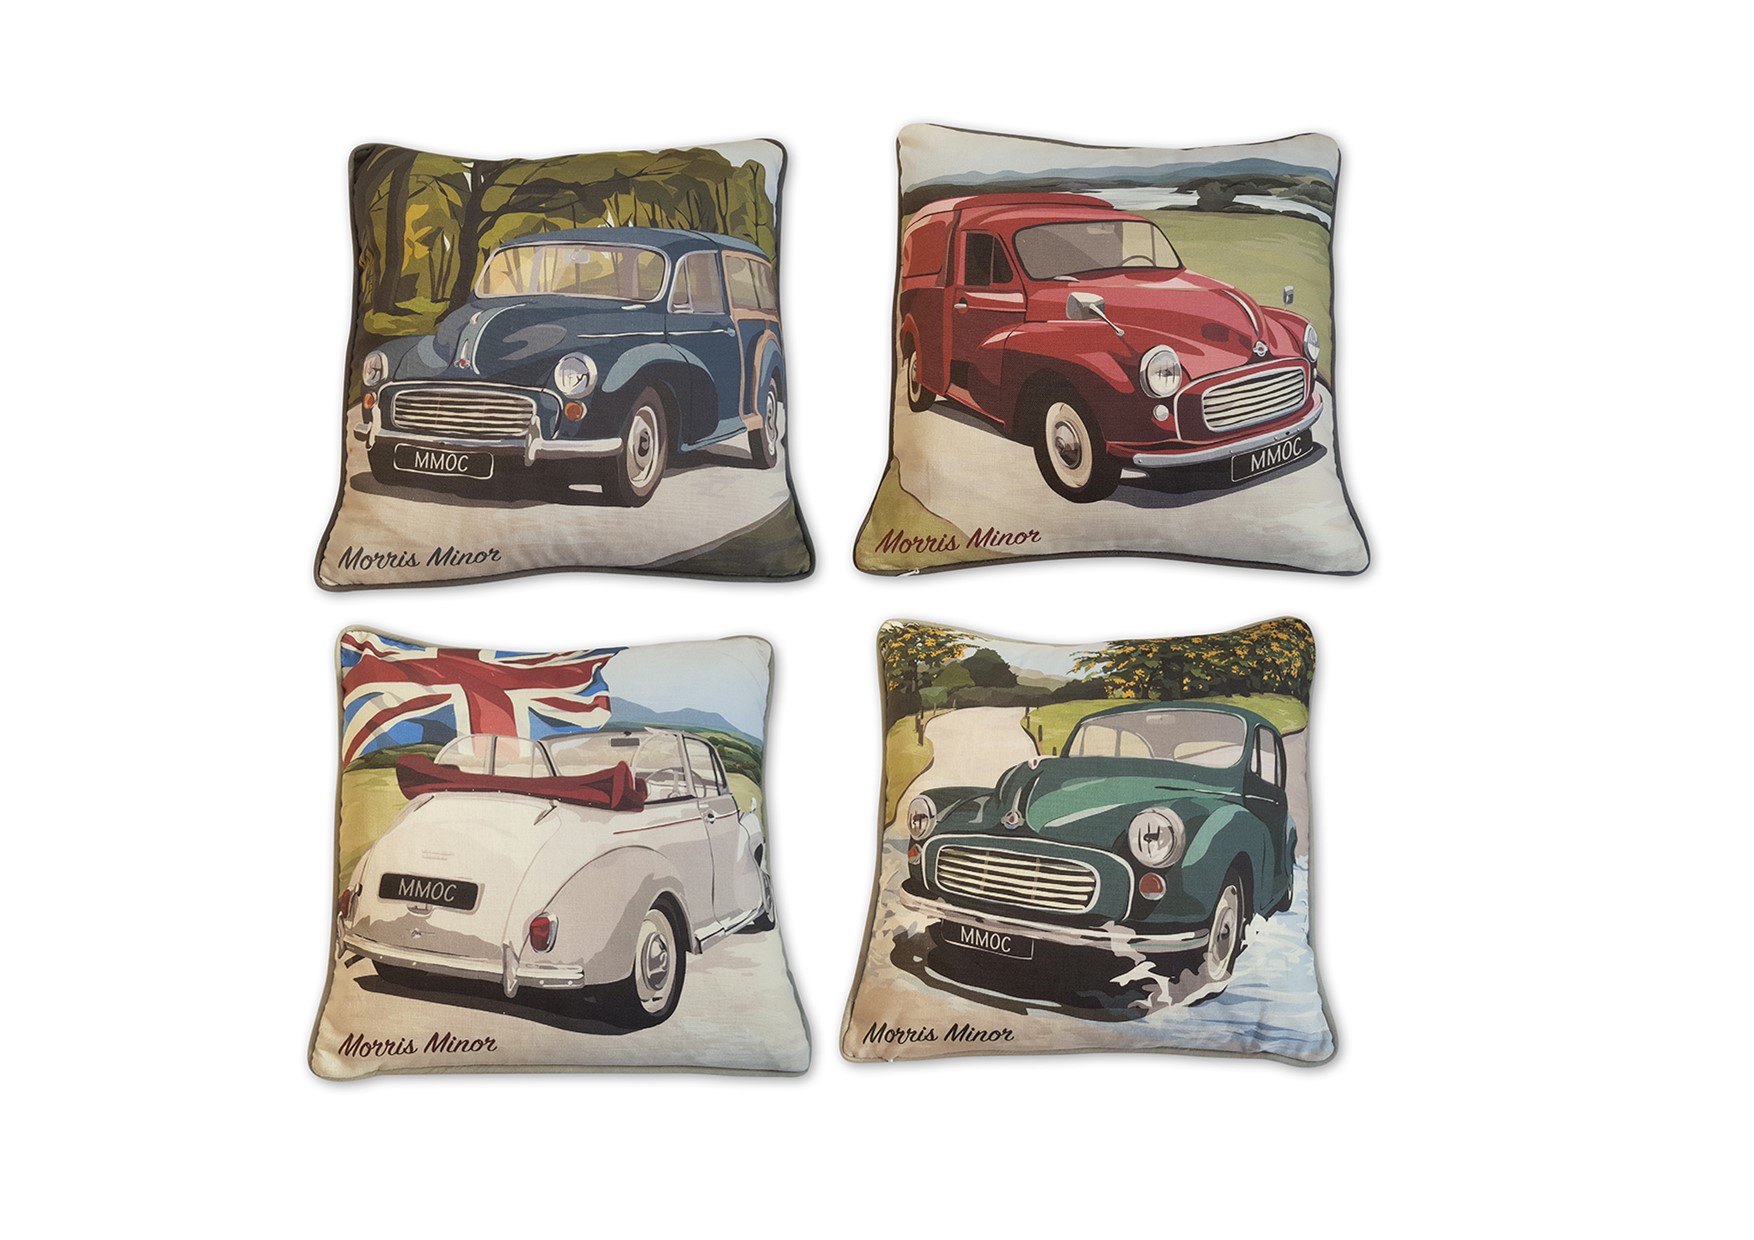 Cushion Covers - Two (both designs)